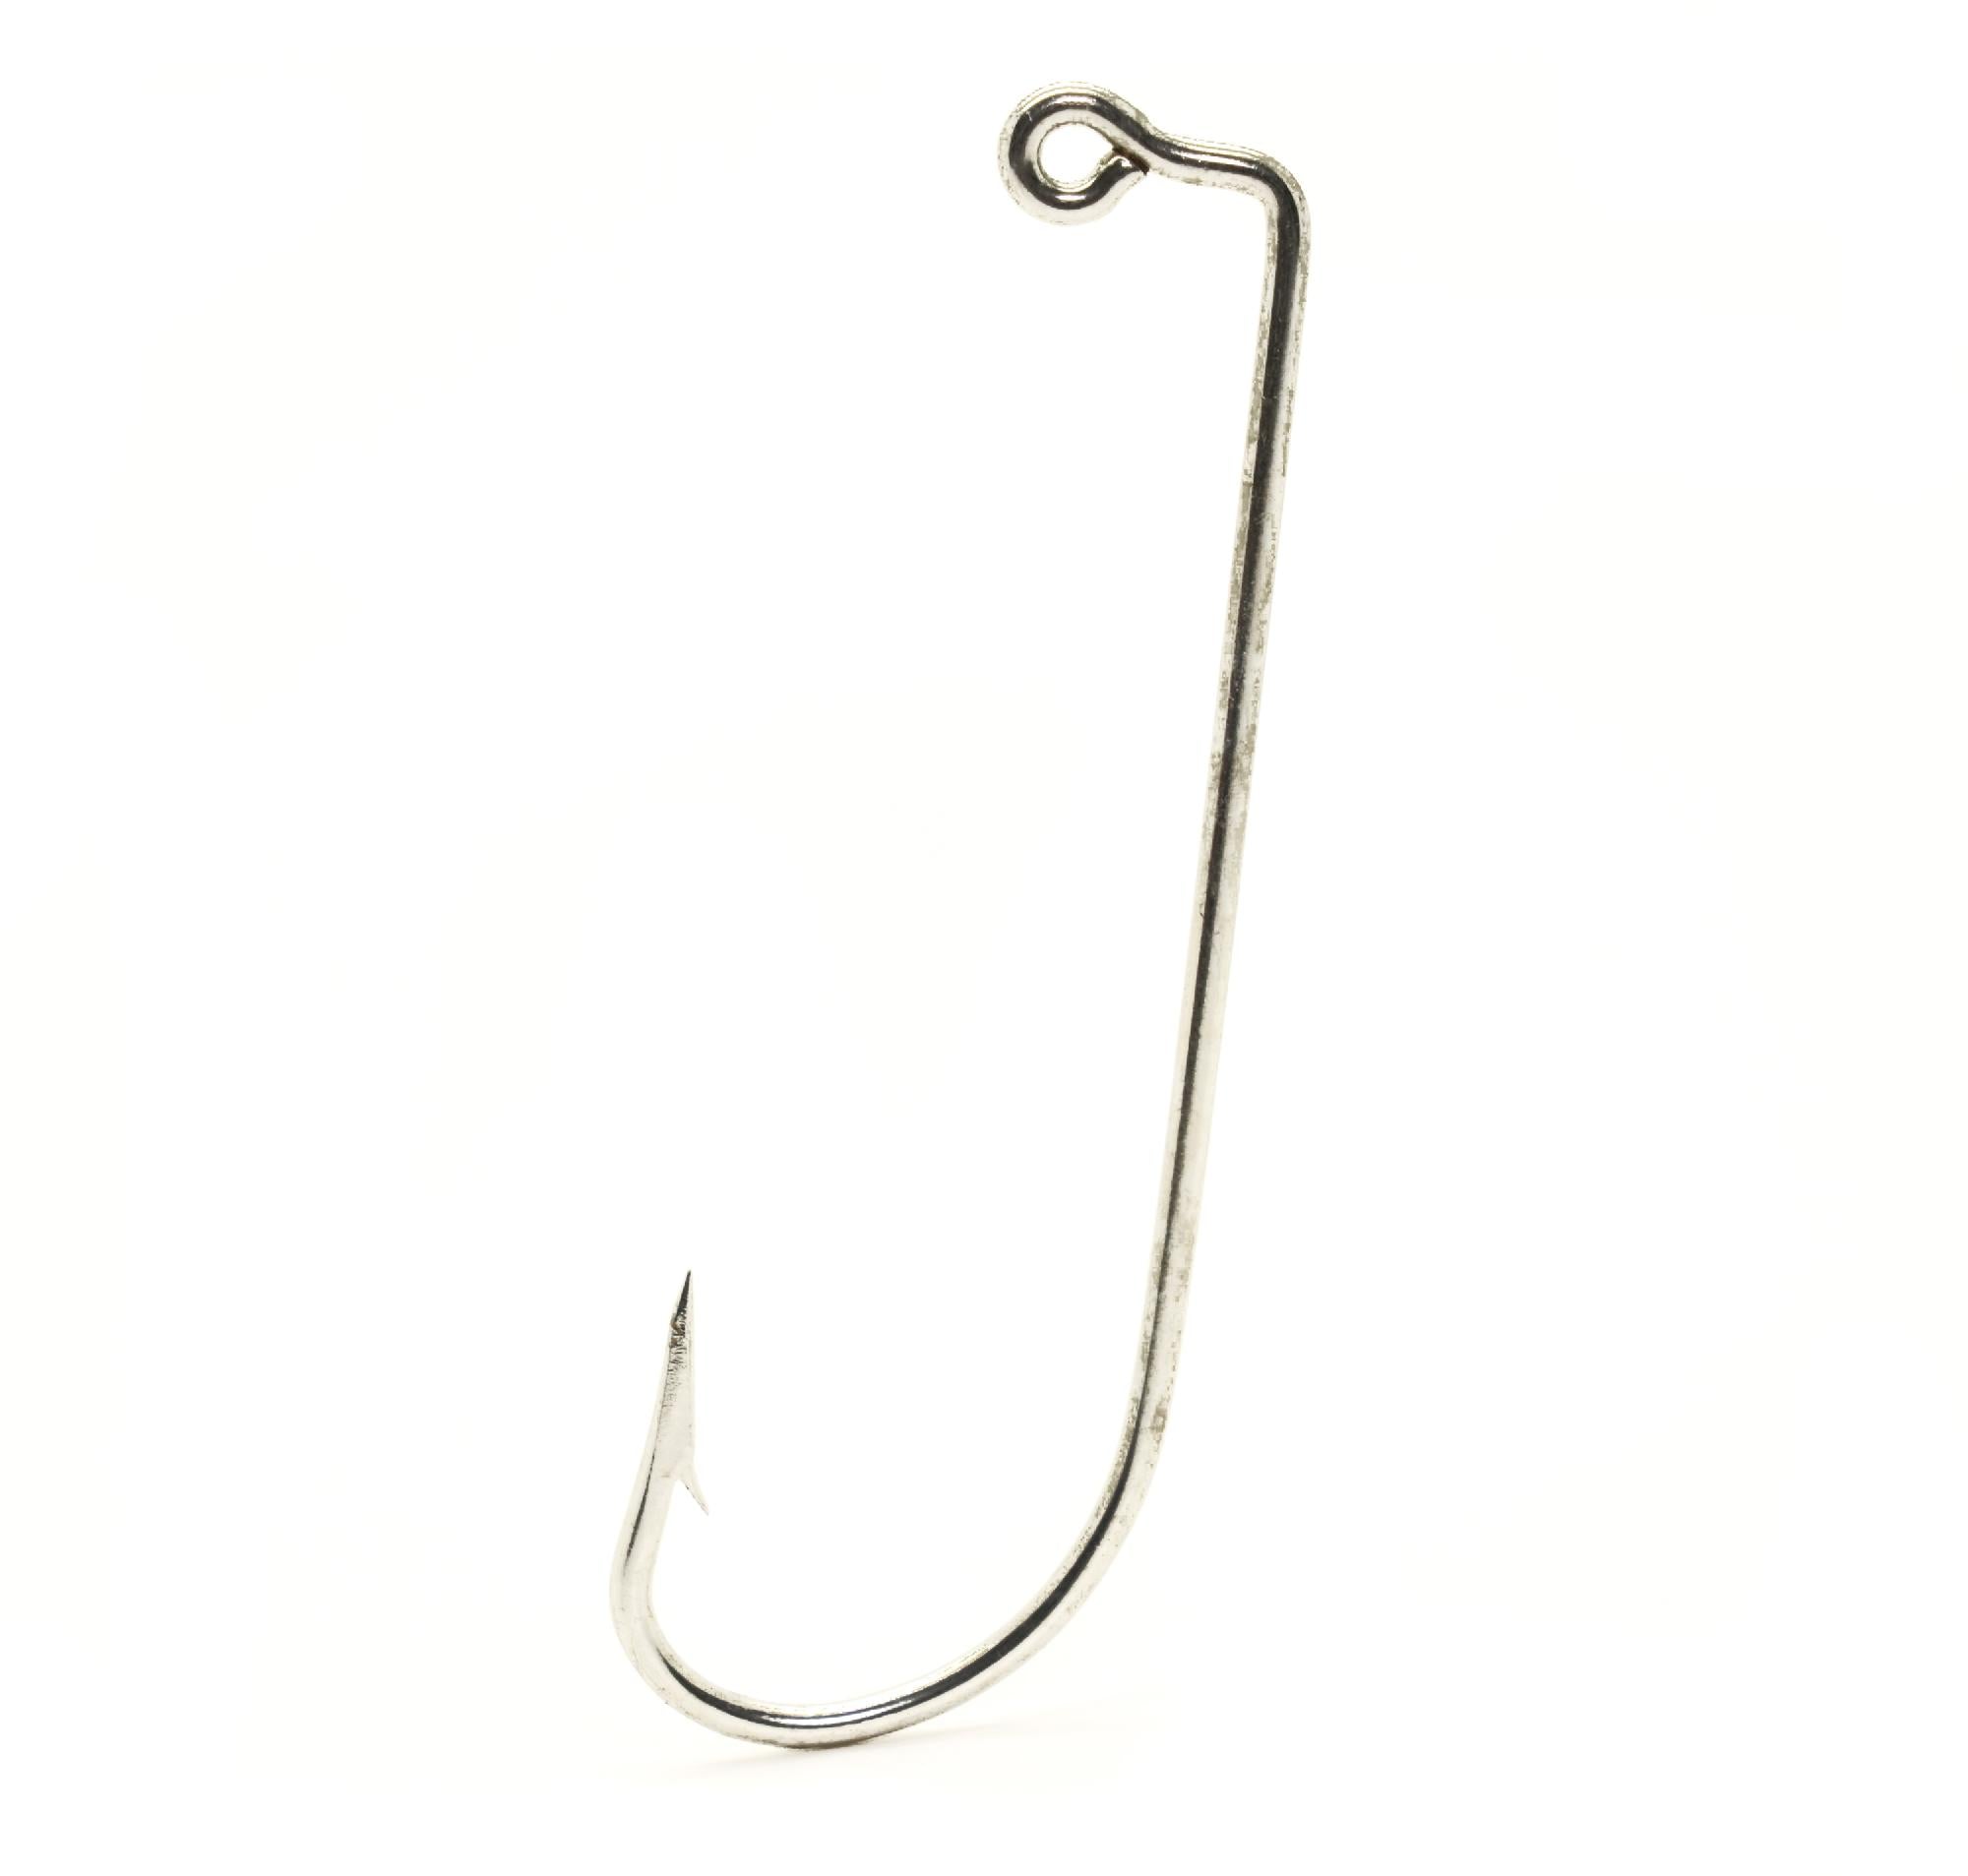 Mustad 32786 Ultra Point 60 Degree Black Nickel Jig Fishing Hooks 100 Pack  2/0-6/0, DIY Jig Hooks, Fits The Do It Molds Great for Pouring Your Own